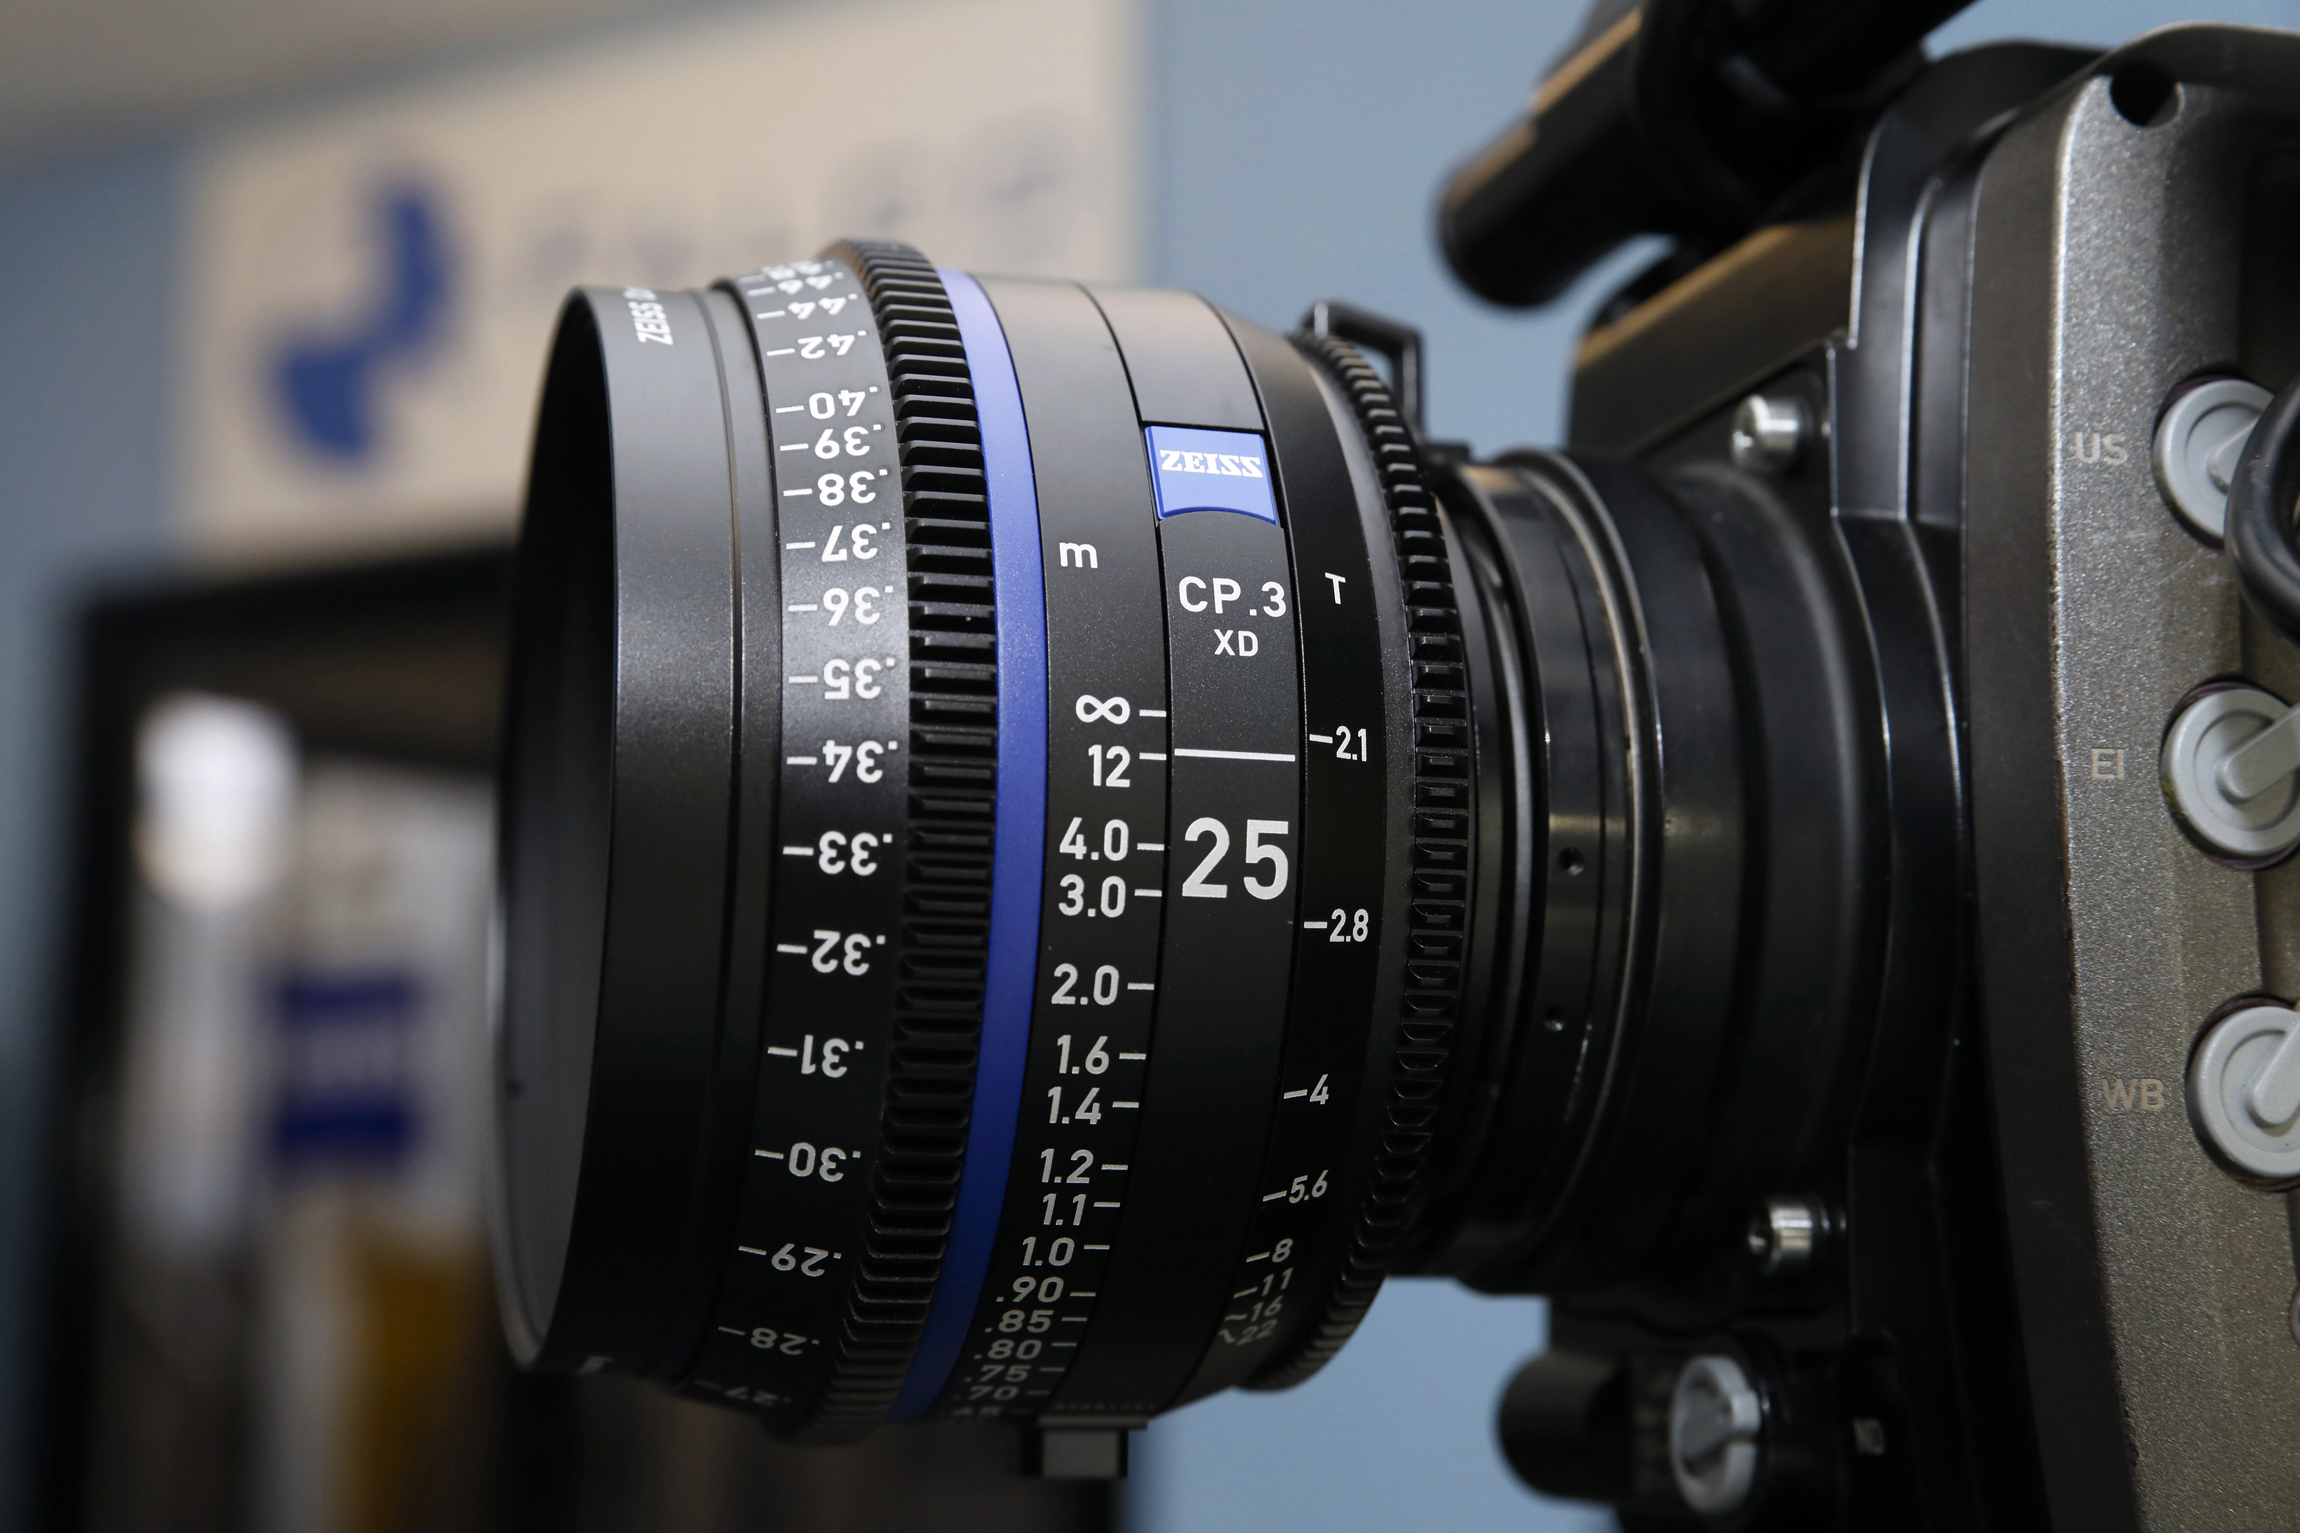 ZEISS CP.3 XD 25MM T2.1